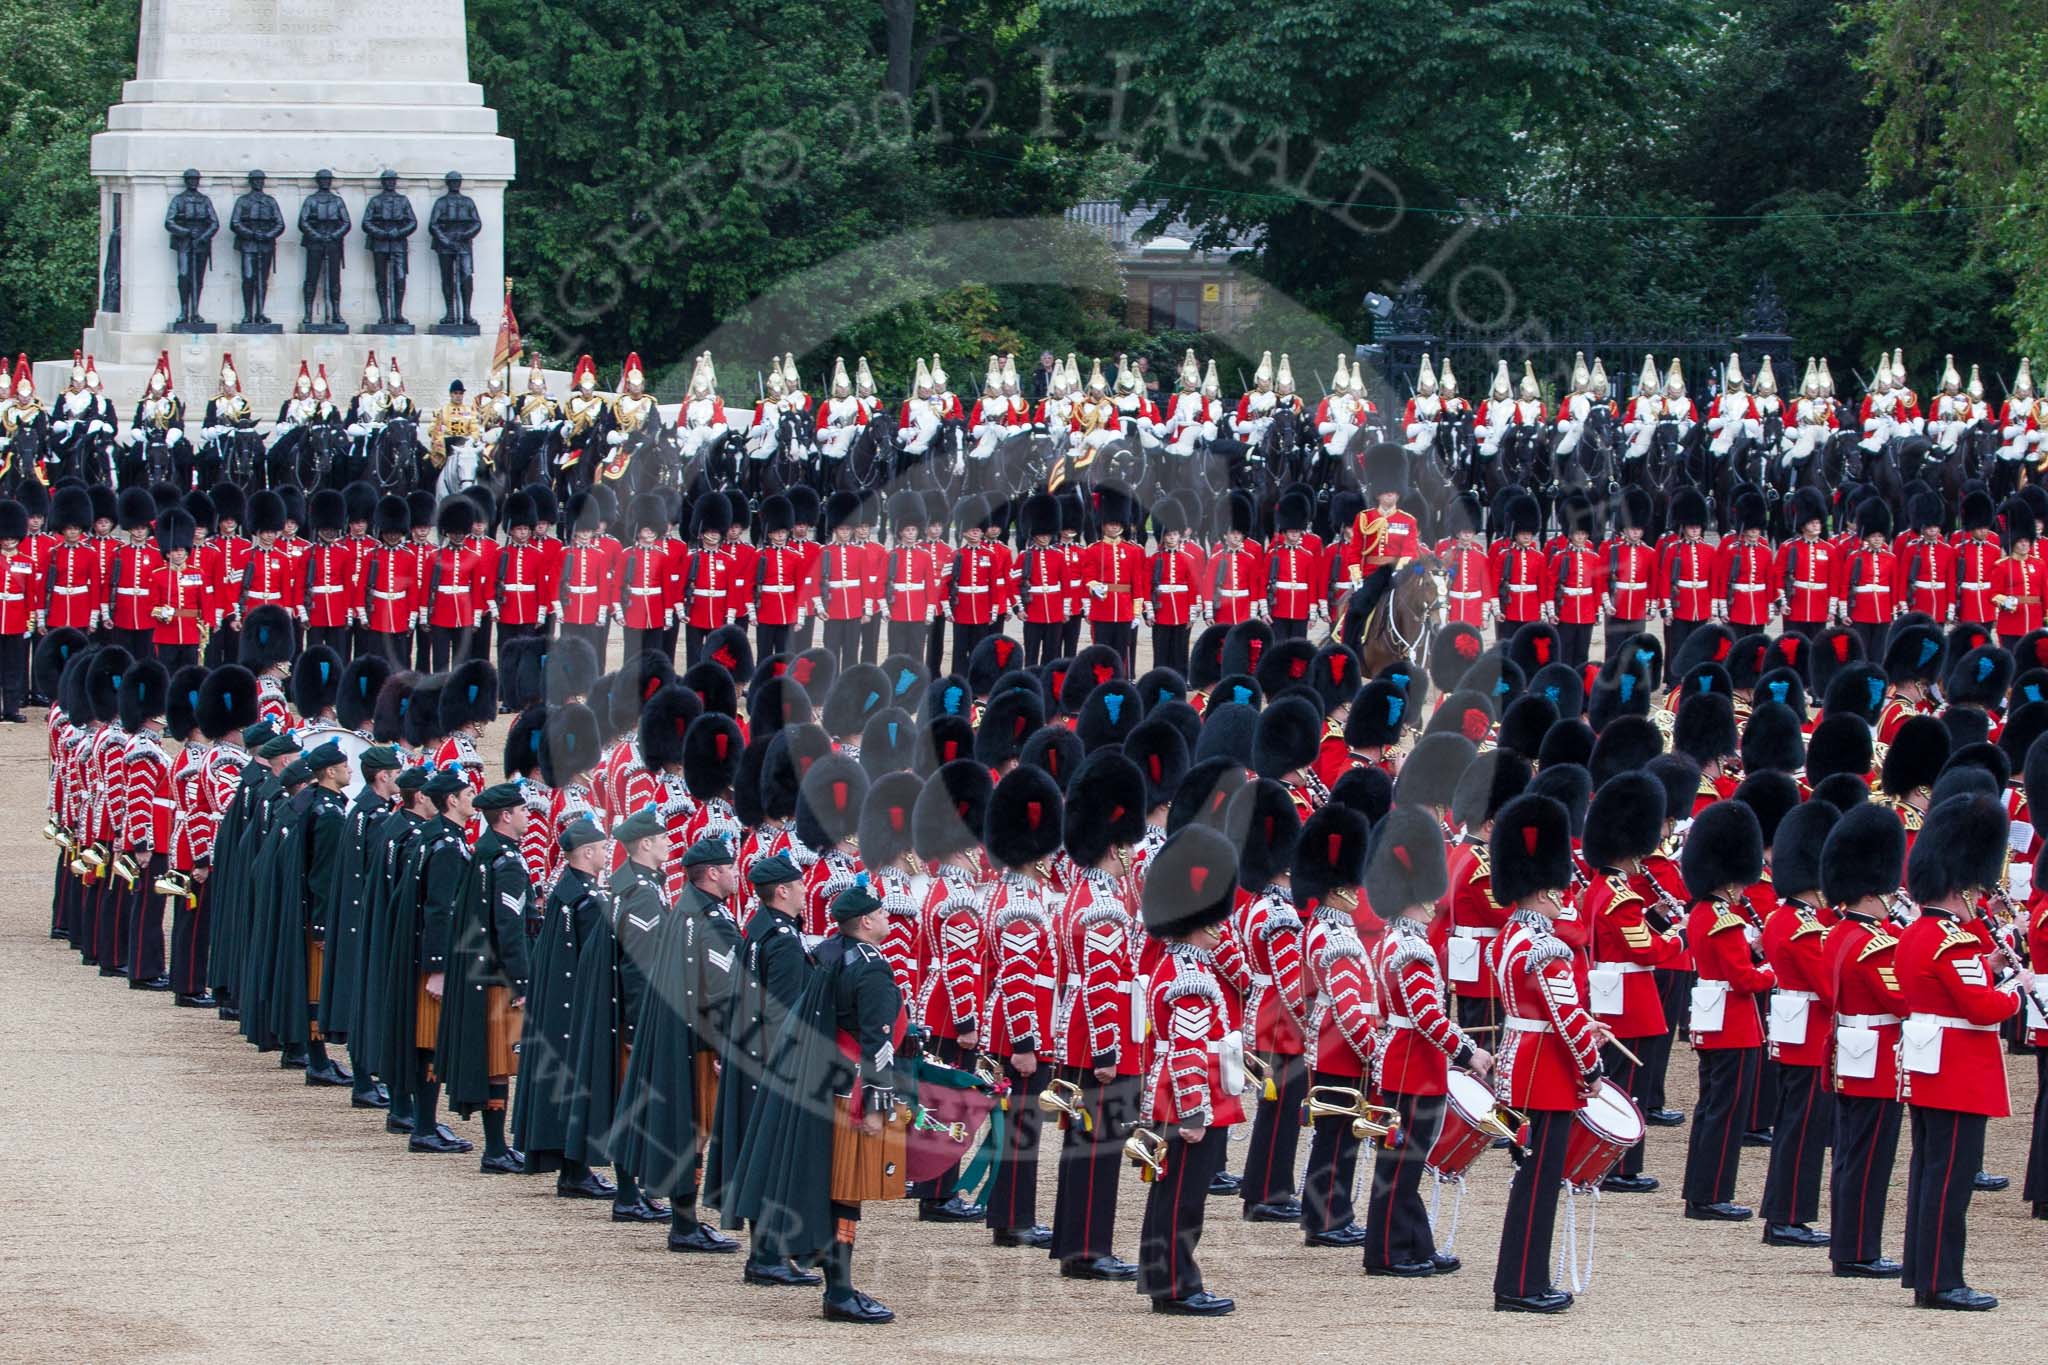 Trooping the Colour 2012: The Massed Bands Troop - drummers and pipers of the Band of the Irish Guards on the read of the bands..
Horse Guards Parade, Westminster,
London SW1,

United Kingdom,
on 16 June 2012 at 11:15, image #286